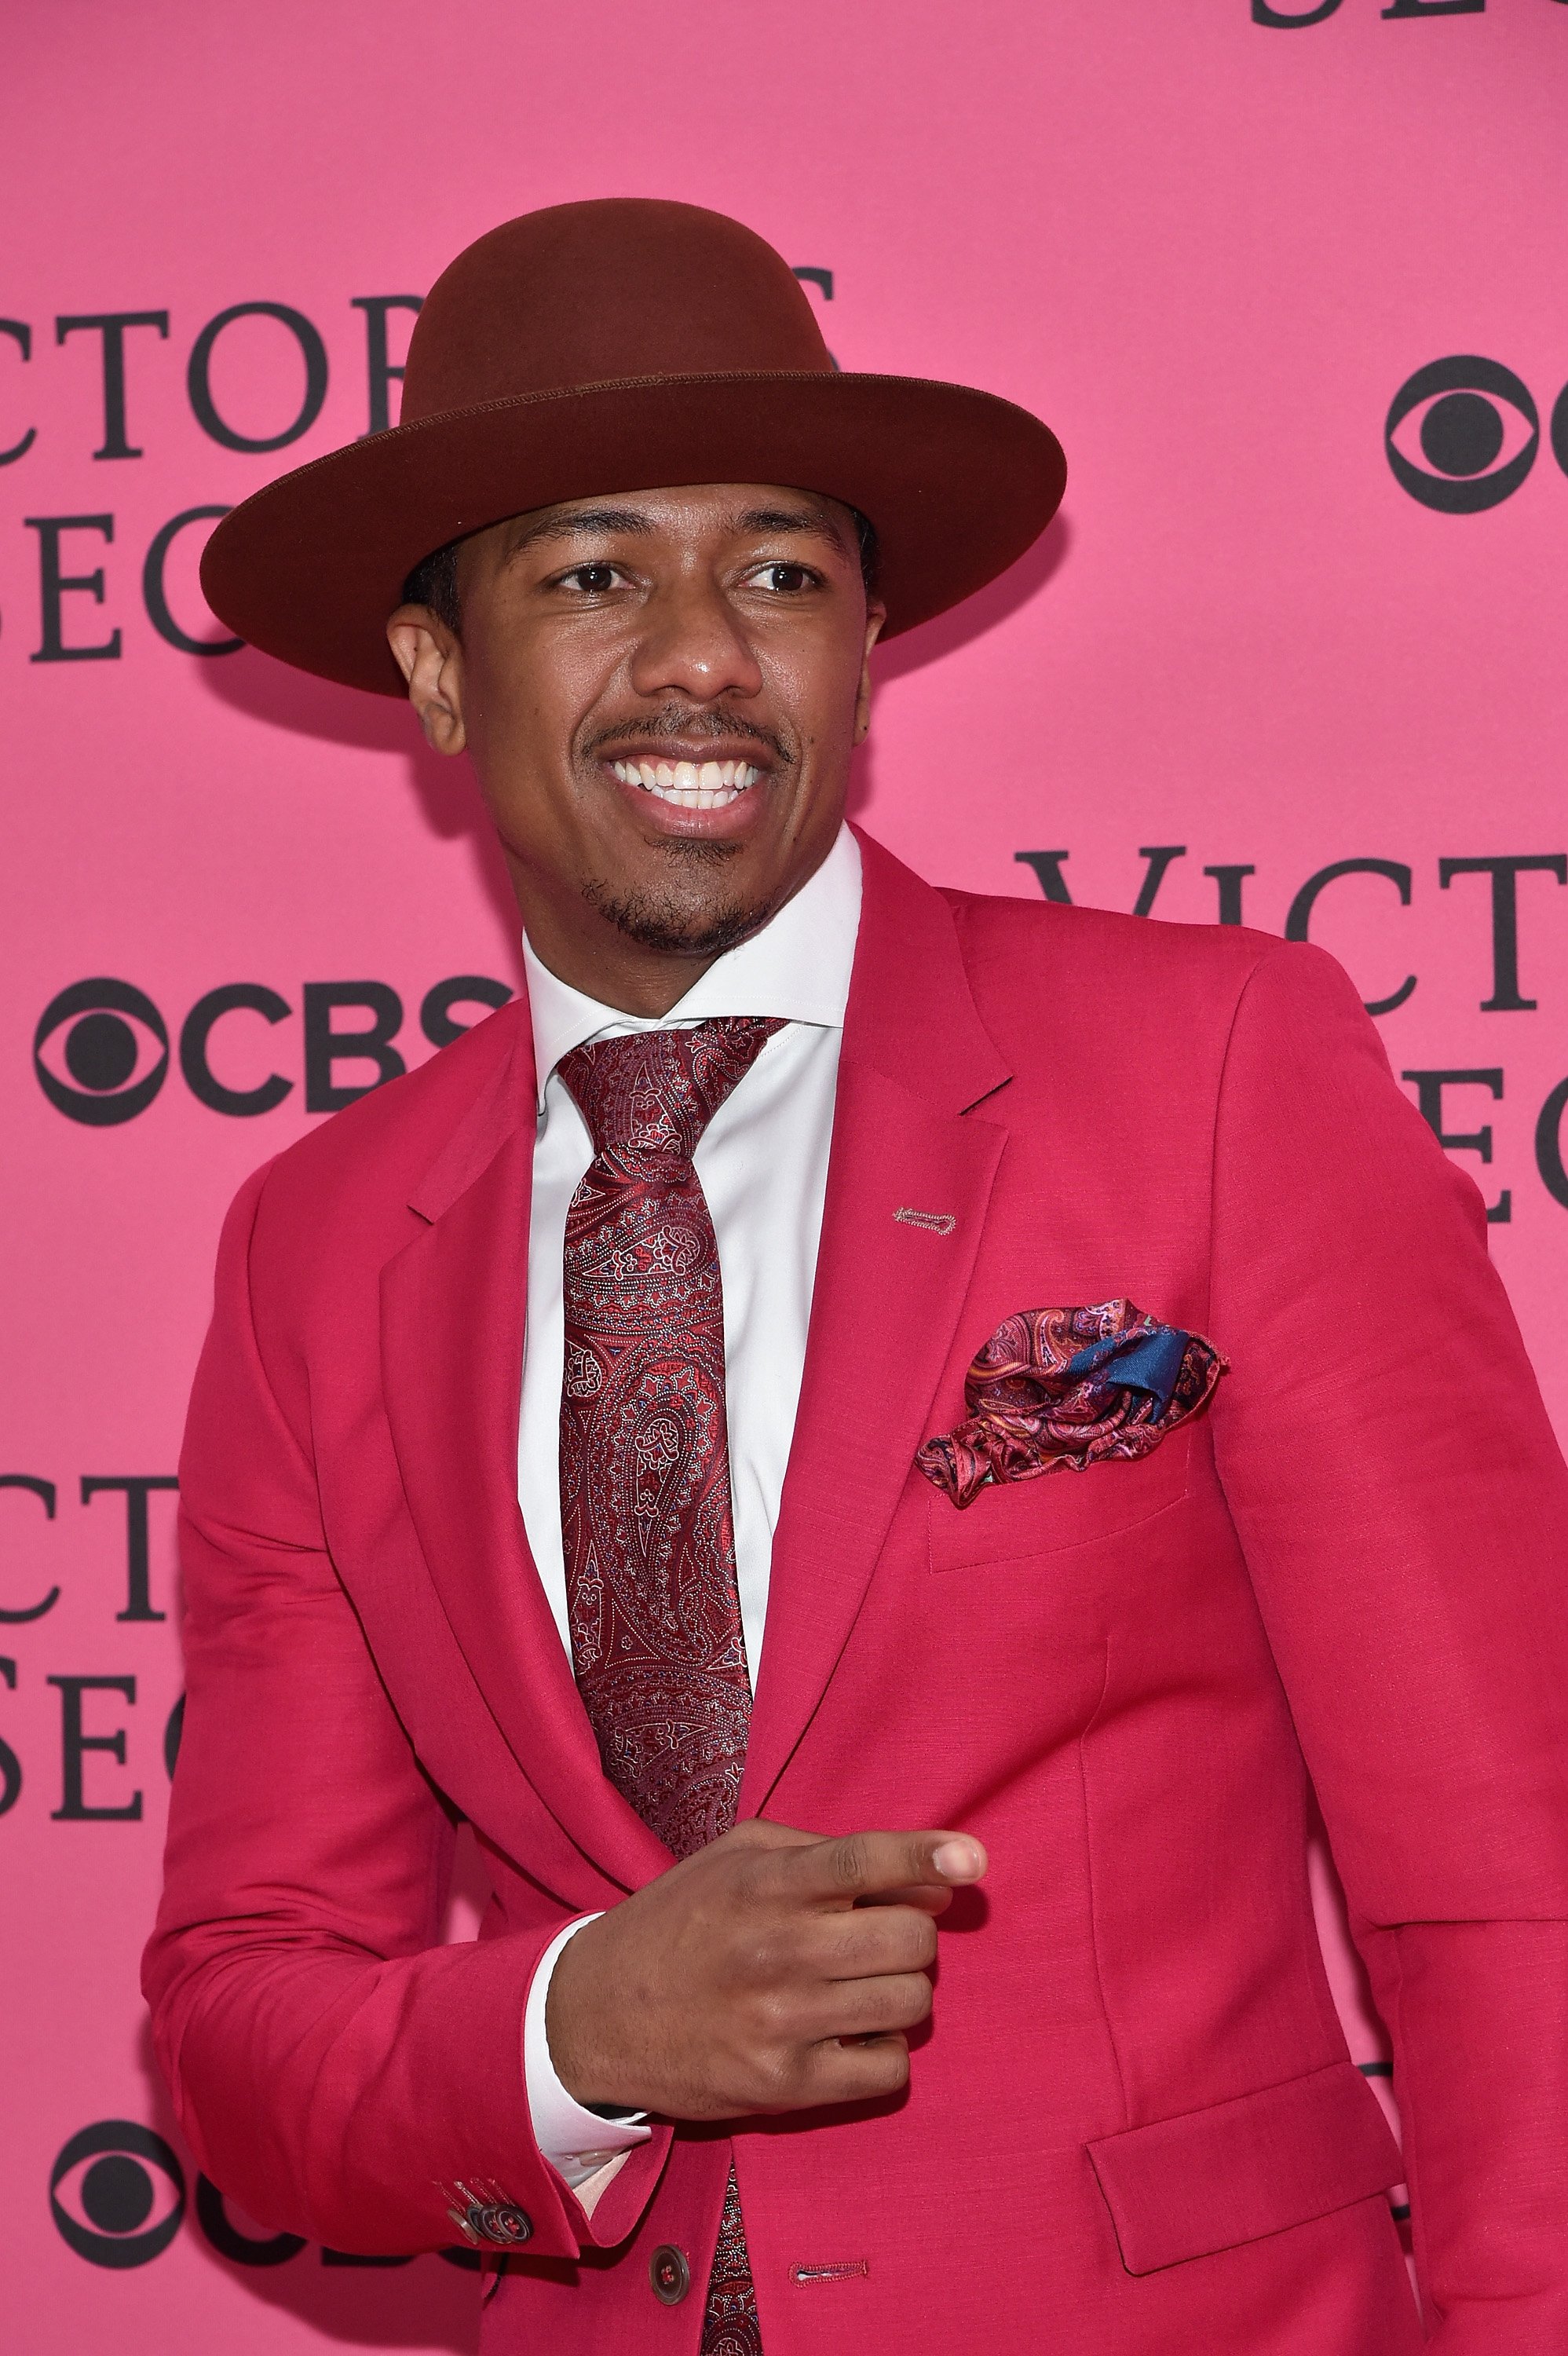 Nick Cannon at the Victoria's Secret Fashion Show at Lexington Avenue Armory on November 10, 2015 in New York City. |Source: Getty Images